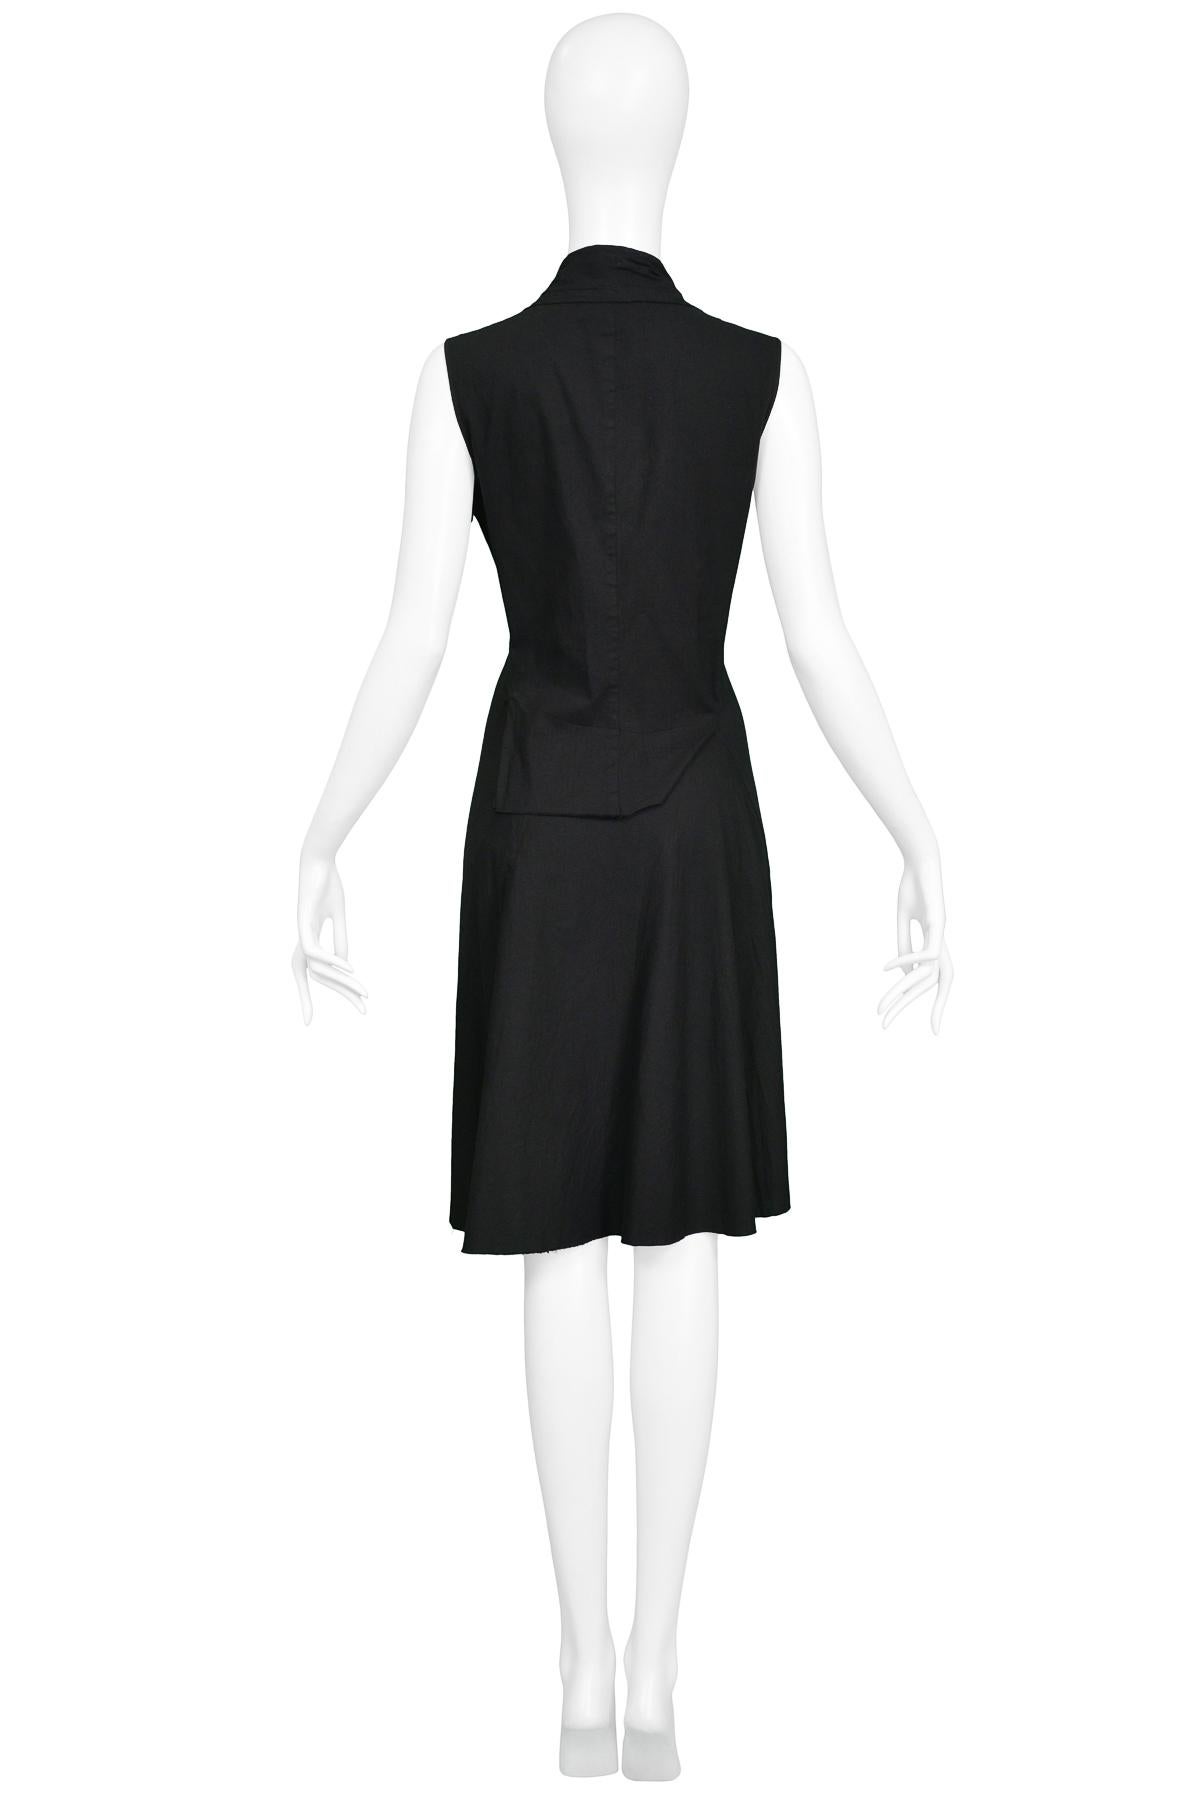 Junya Watanabe Iconic Black Zipper Dress 2005 In Excellent Condition In Los Angeles, CA